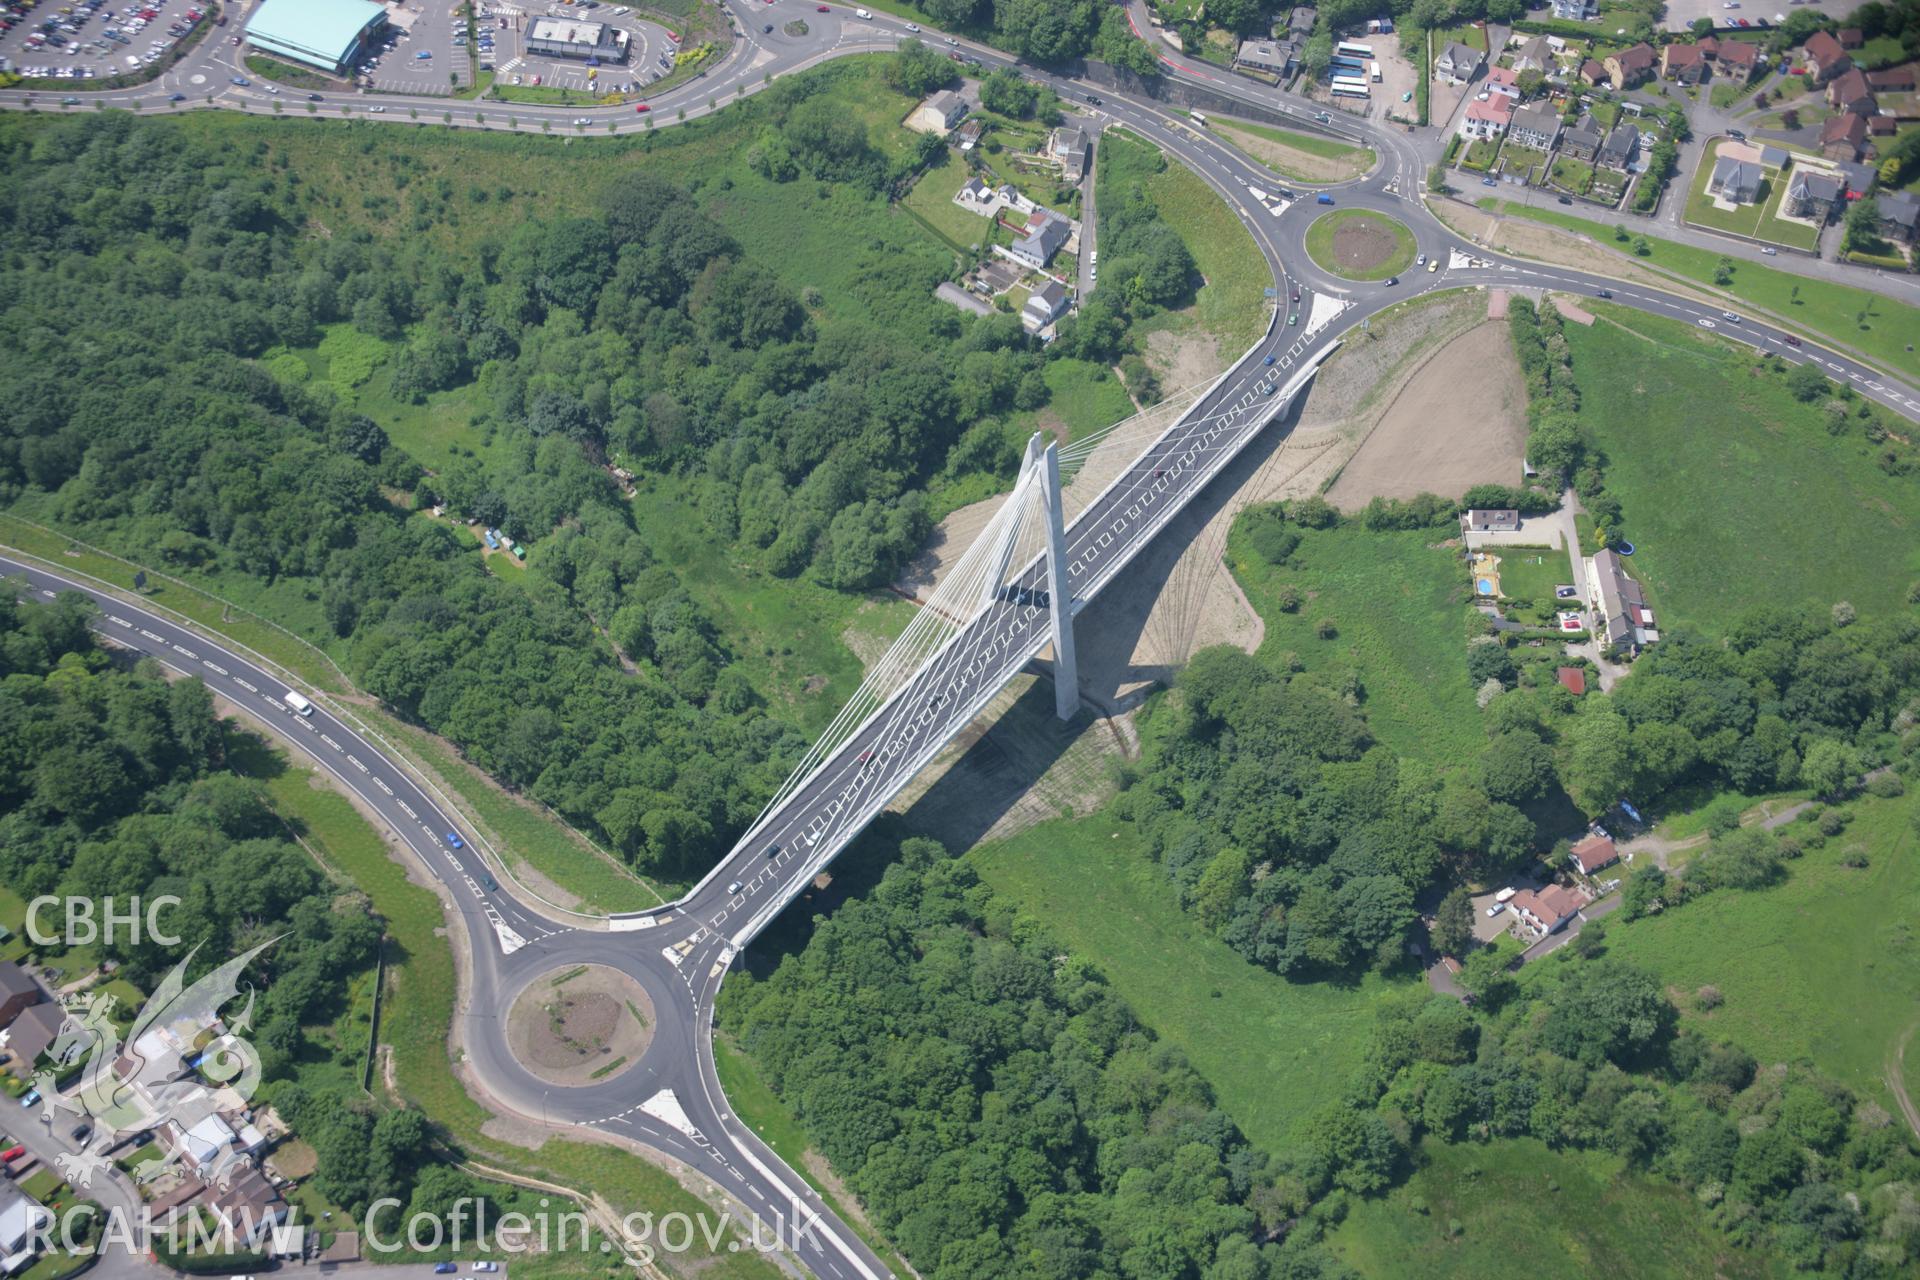 RCAHMW colour oblique aerial photograph of Chartist Bridge, Sirhowy Enterprise Way, Blackwood, from the north-east. Taken on 09 June 2006 by Toby Driver.